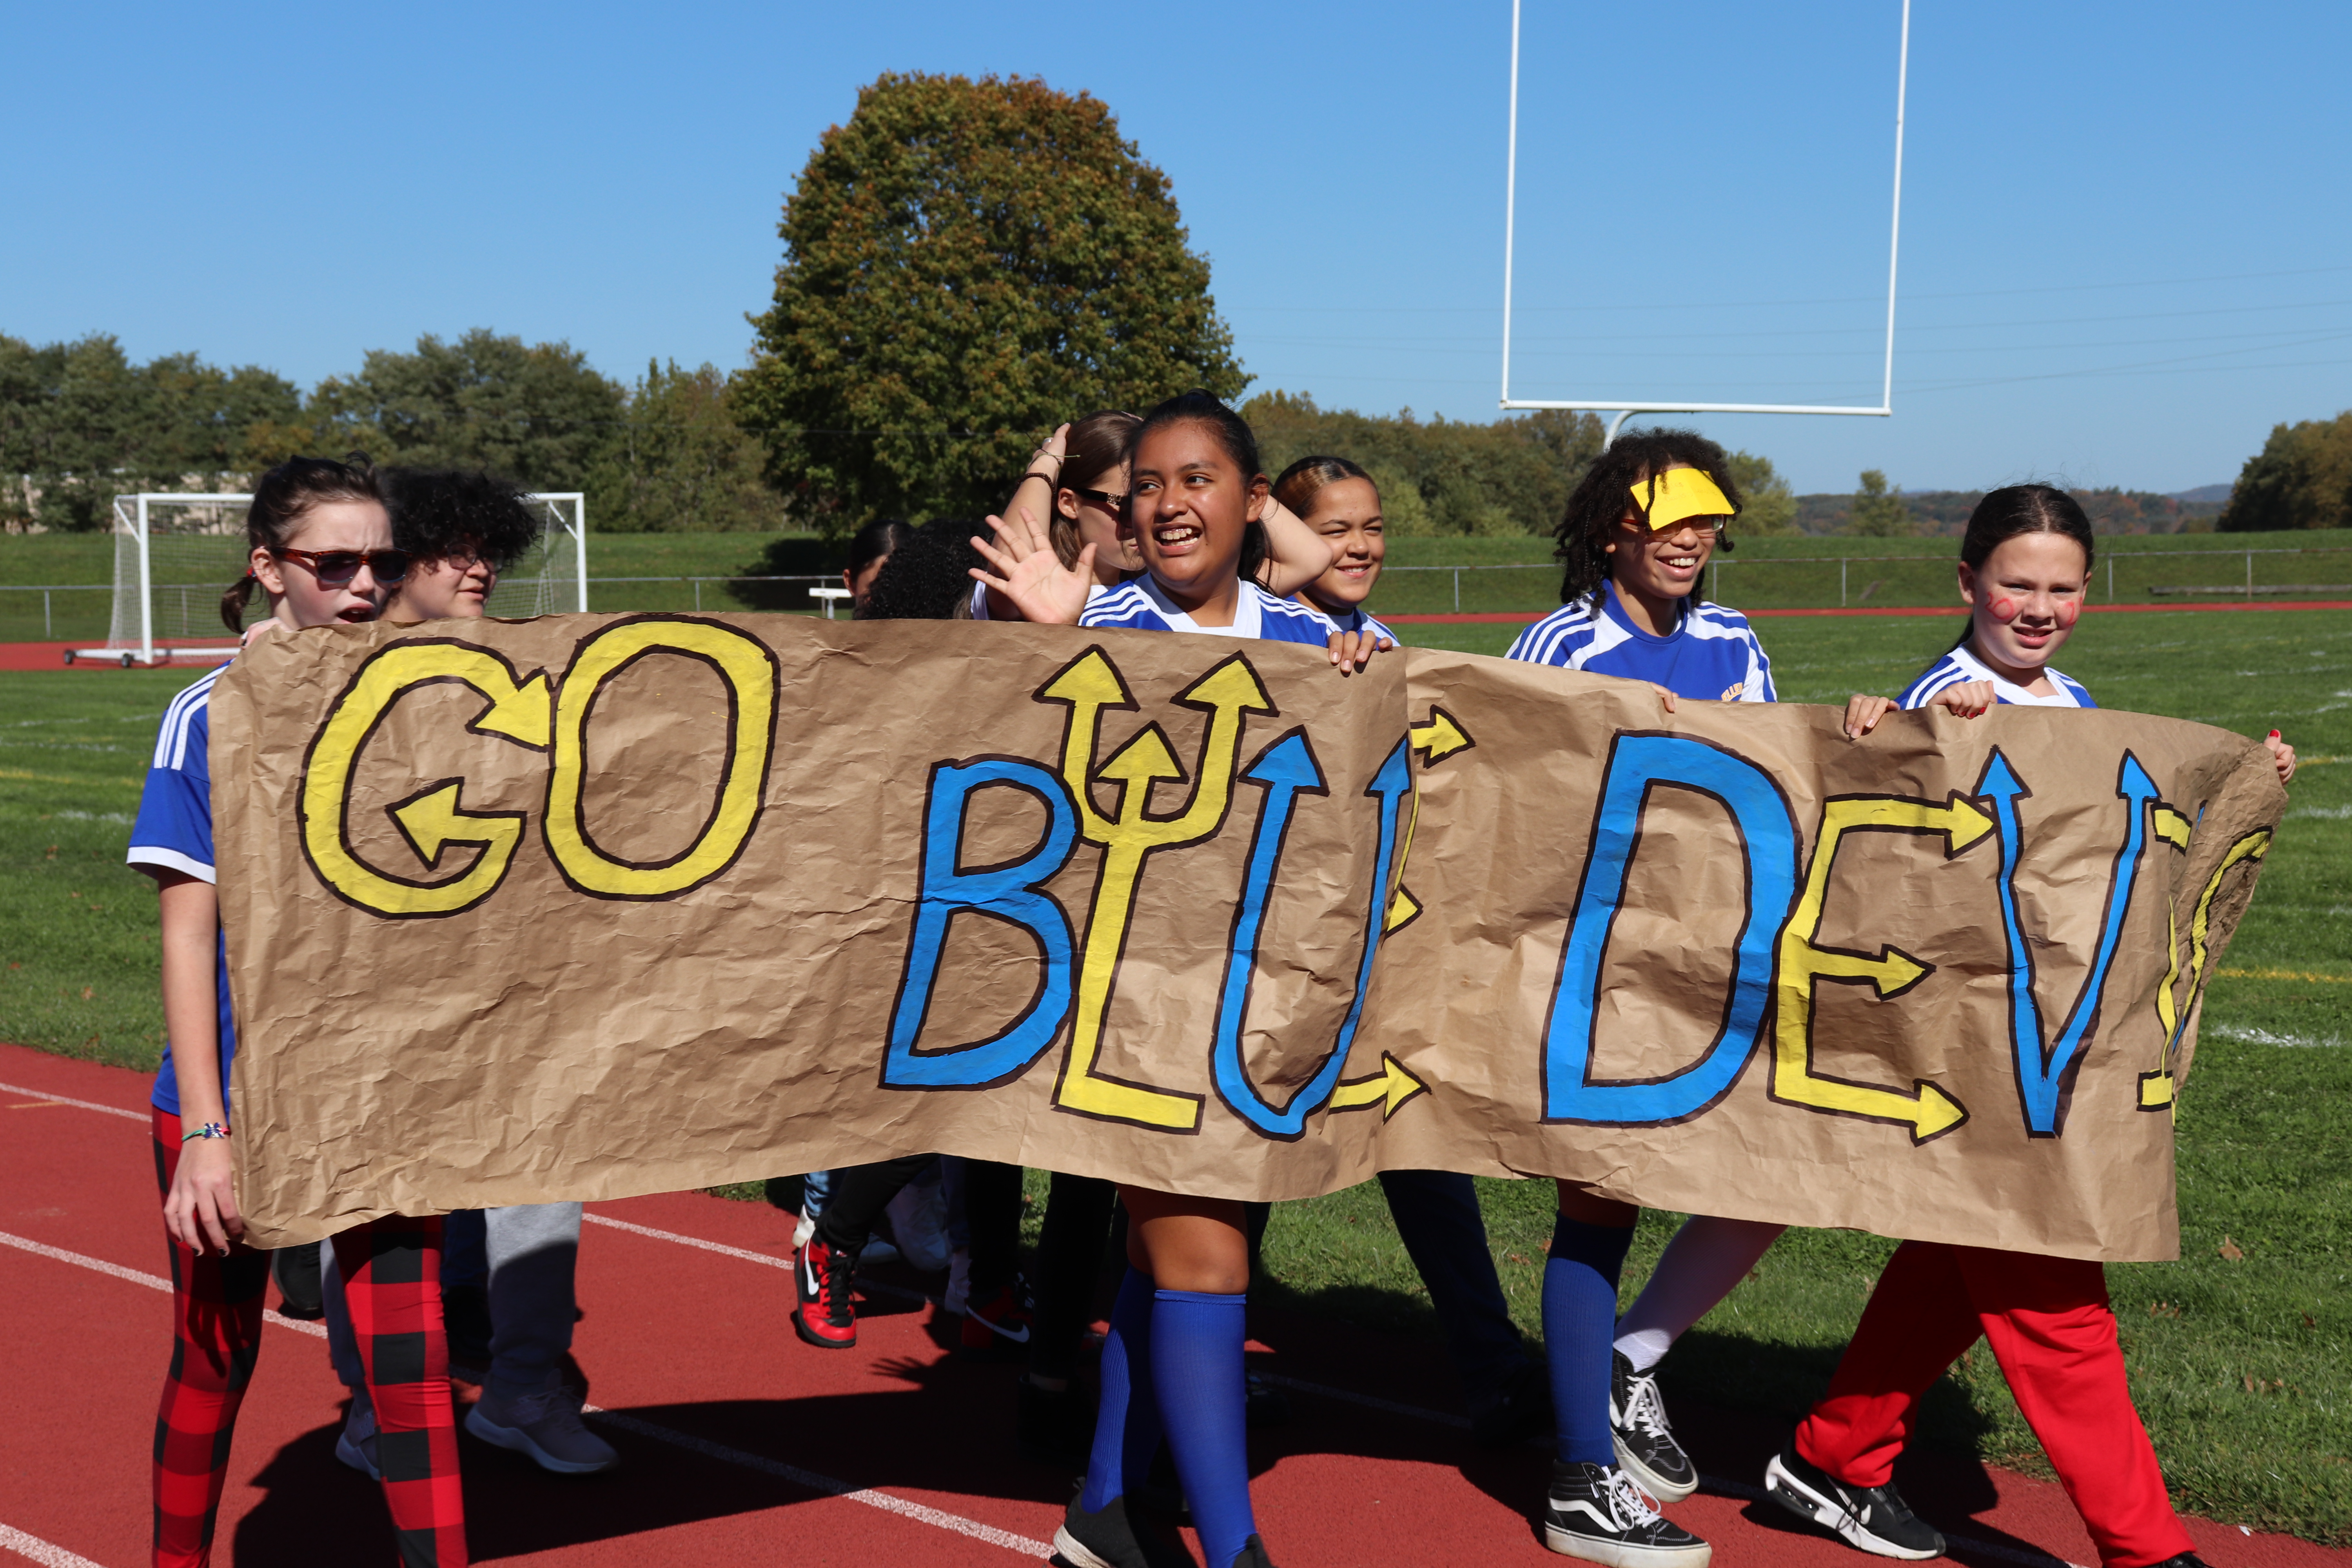 Students holding up Go Blue Devils signs